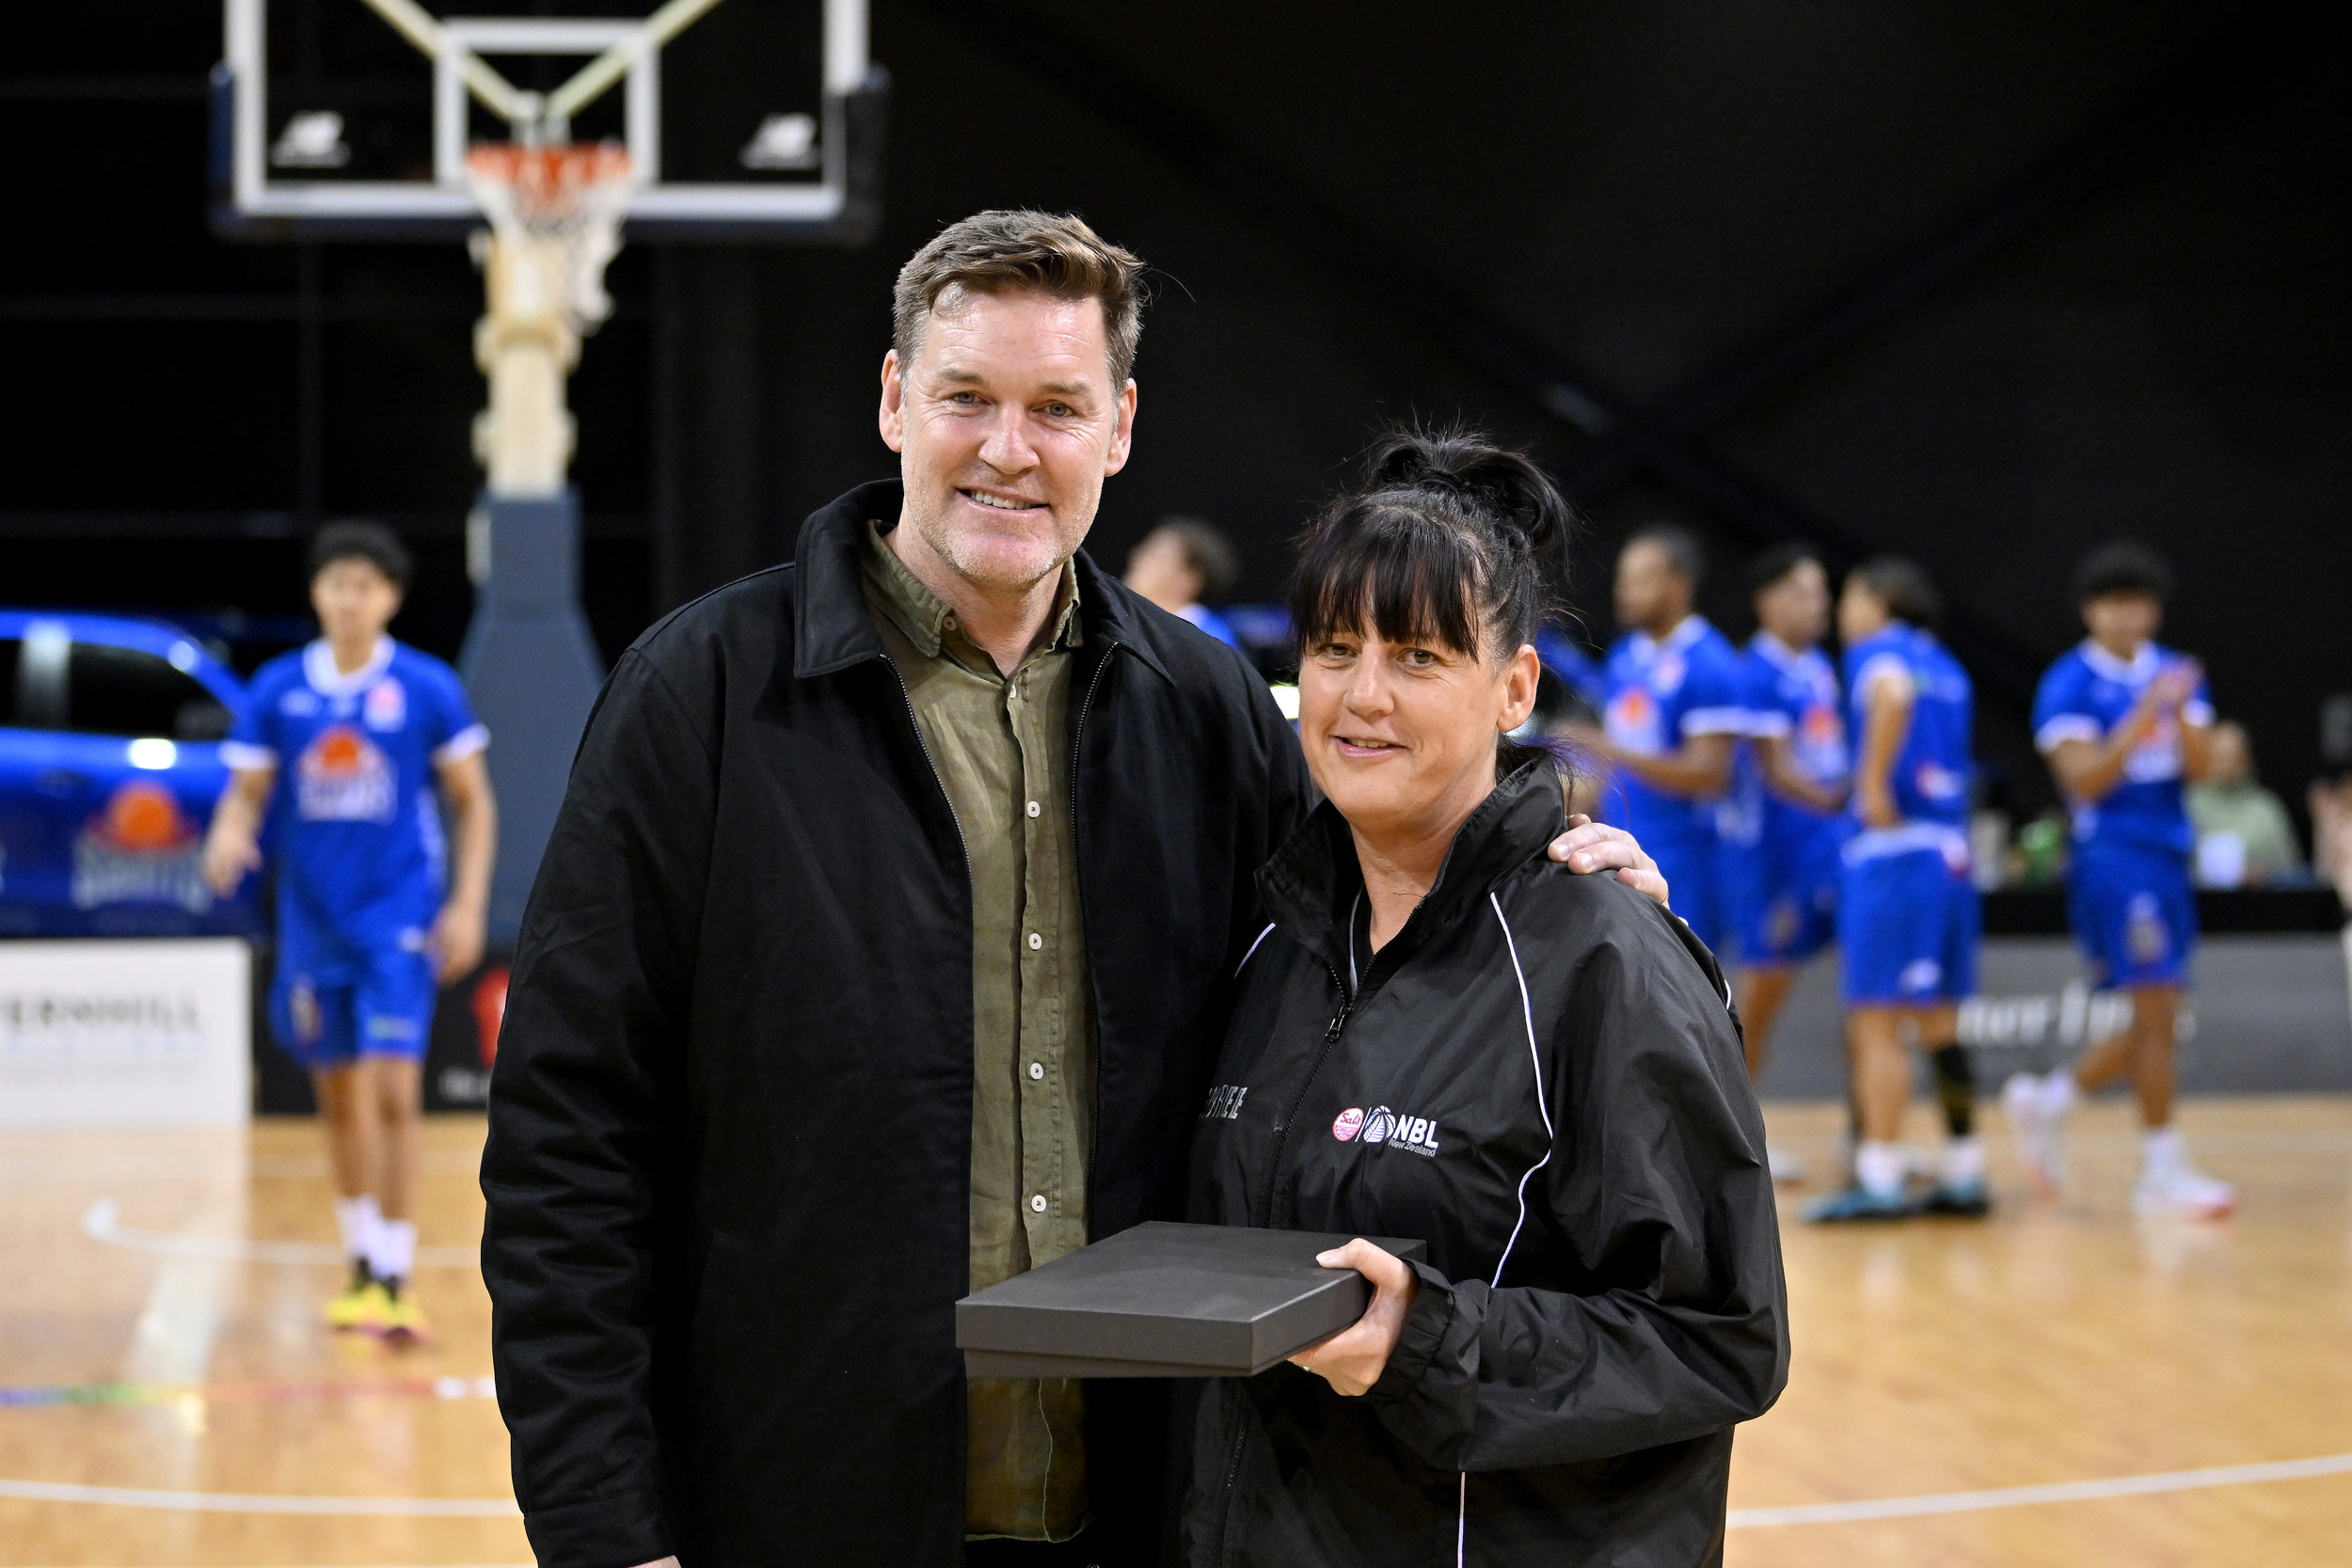 400 Games: Melony O’Connor Reaches Refereeing Milestone in Sal’s NBL